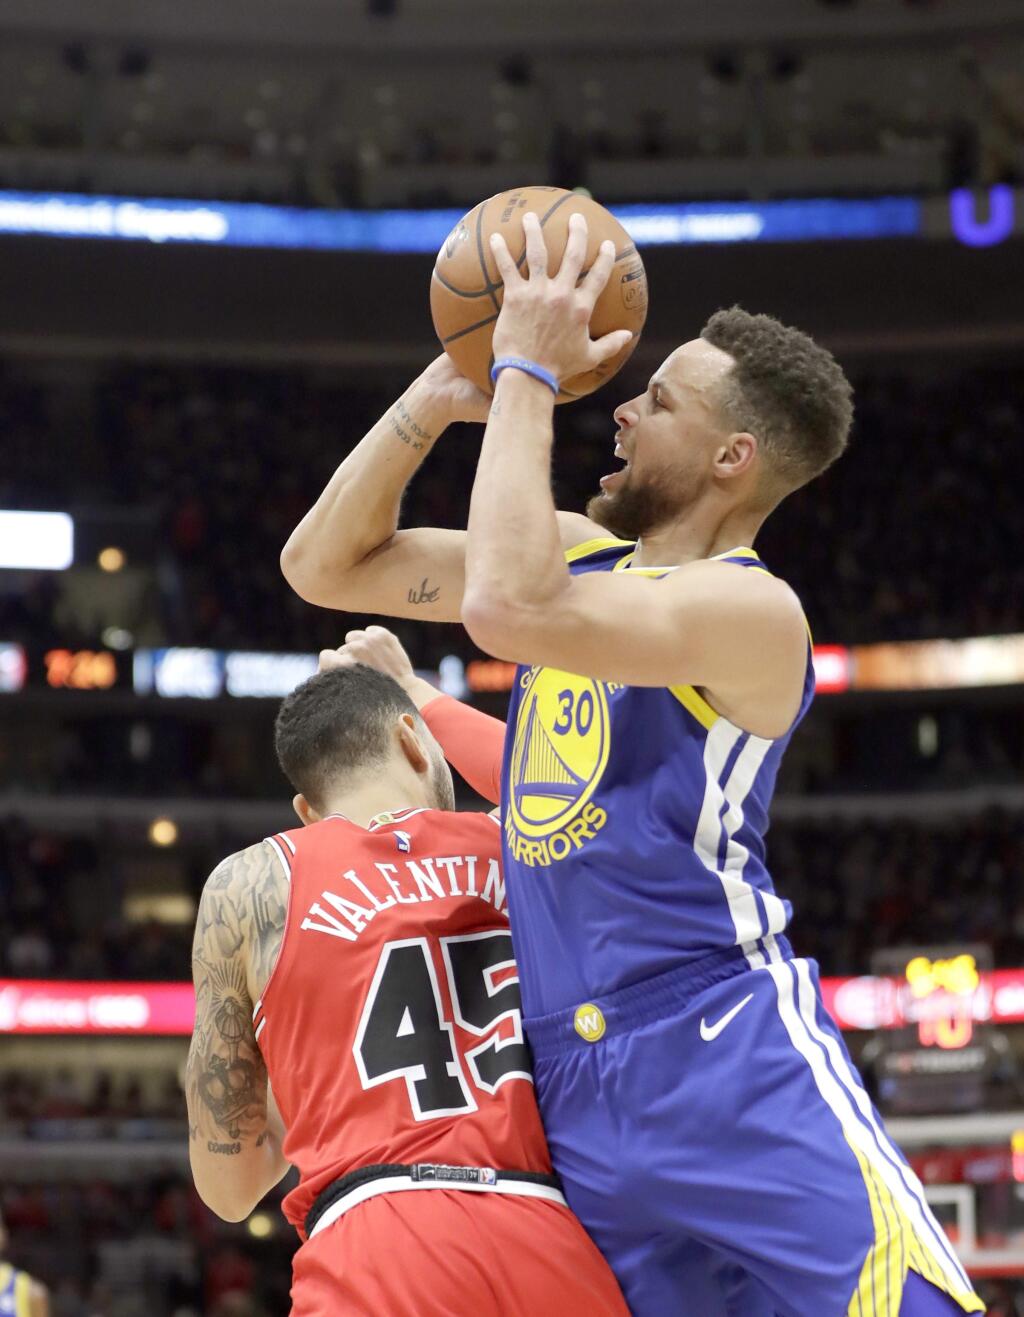 Golden State Warriors' Stephen Curry (30) shoots and draws a foul from Chicago Bulls' Denzel Valentine during the first half of an NBA basketball game Wednesday, Jan. 17, 2018, in Chicago. (AP Photo/Charles Rex Arbogast)